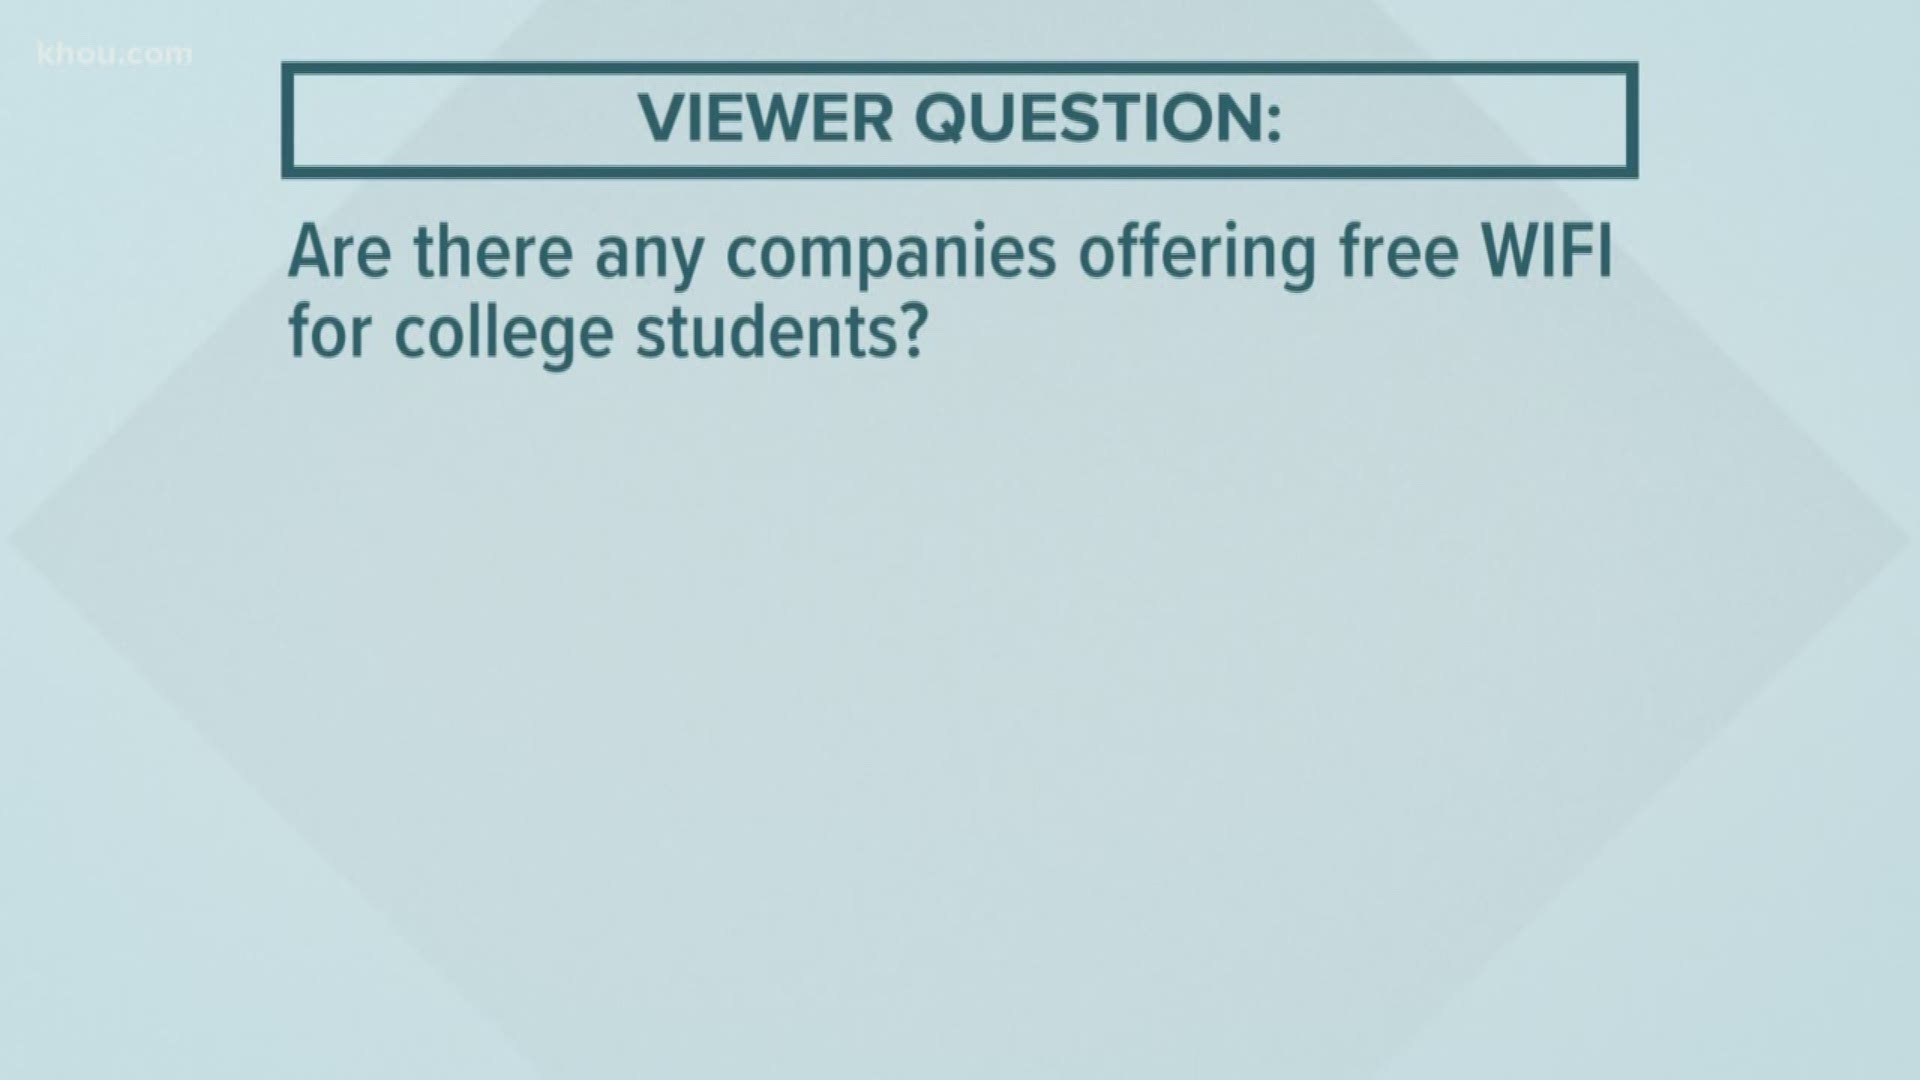 One KHOU 11 viewer wanted to know if there were companies offering free WiFi to students having to finish classes online due to the coronavirus pandemic.